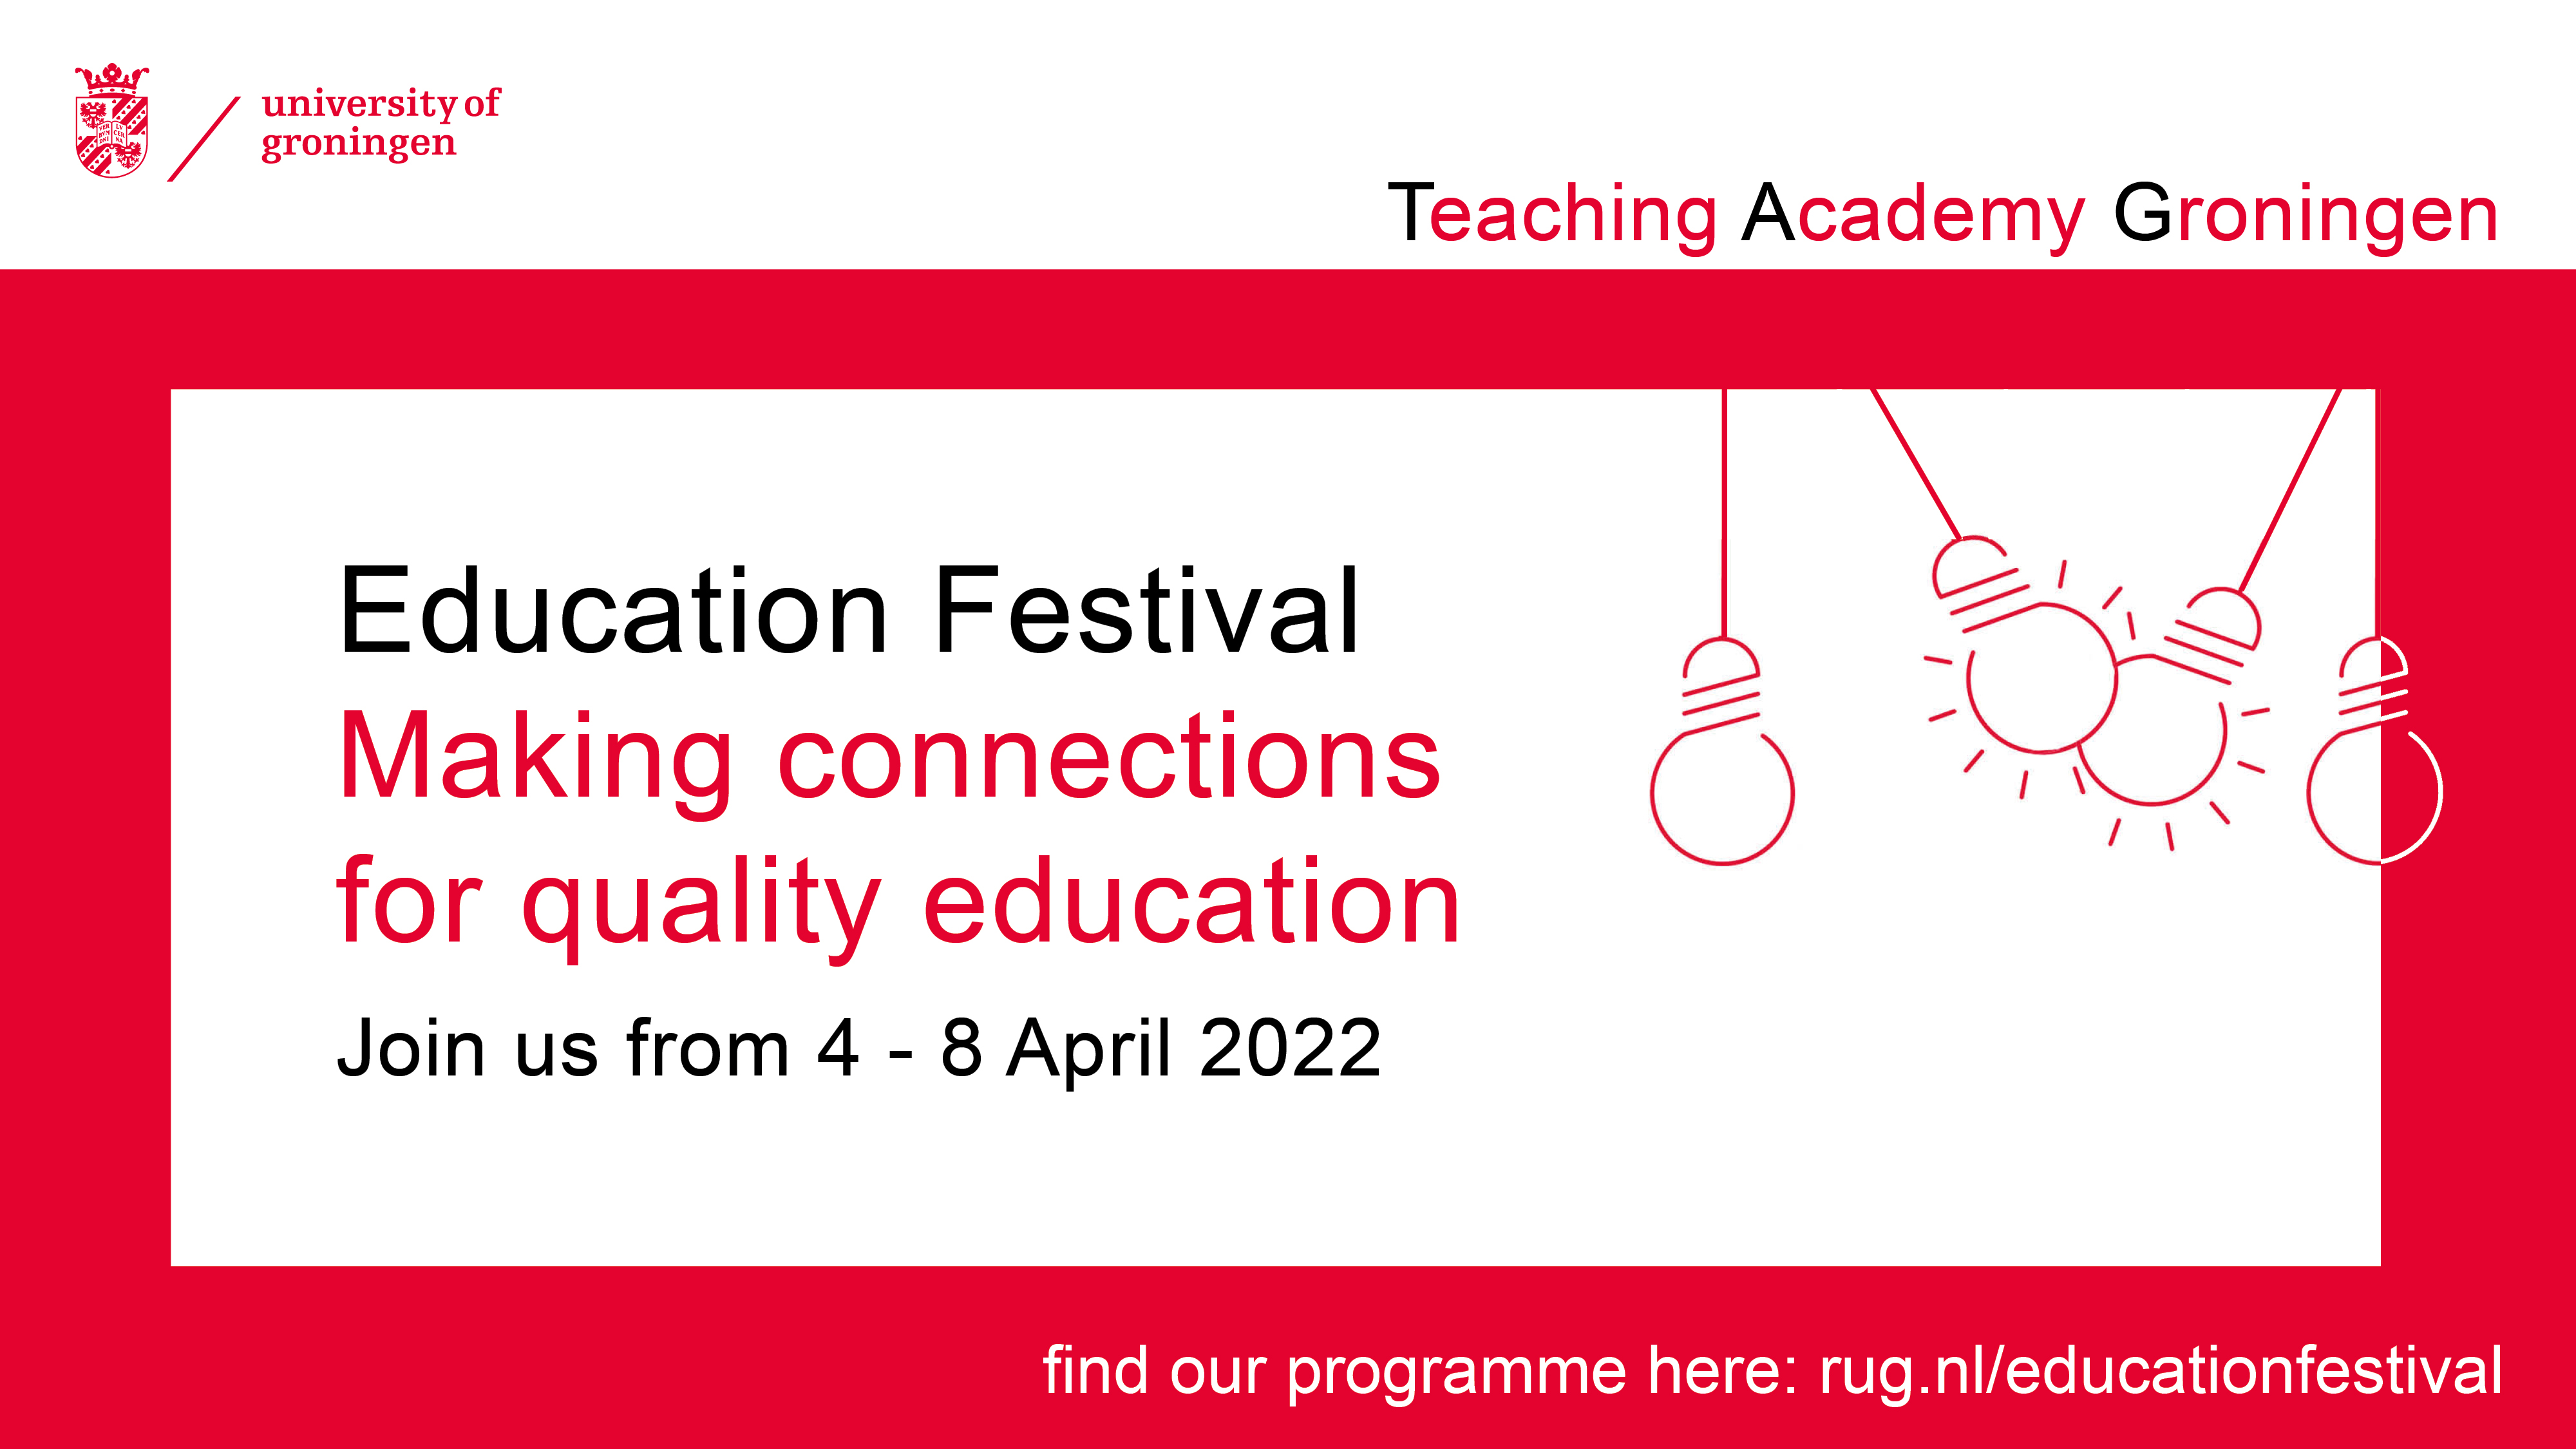 UG Education Festival 2022 - Making Connections for Quality Education